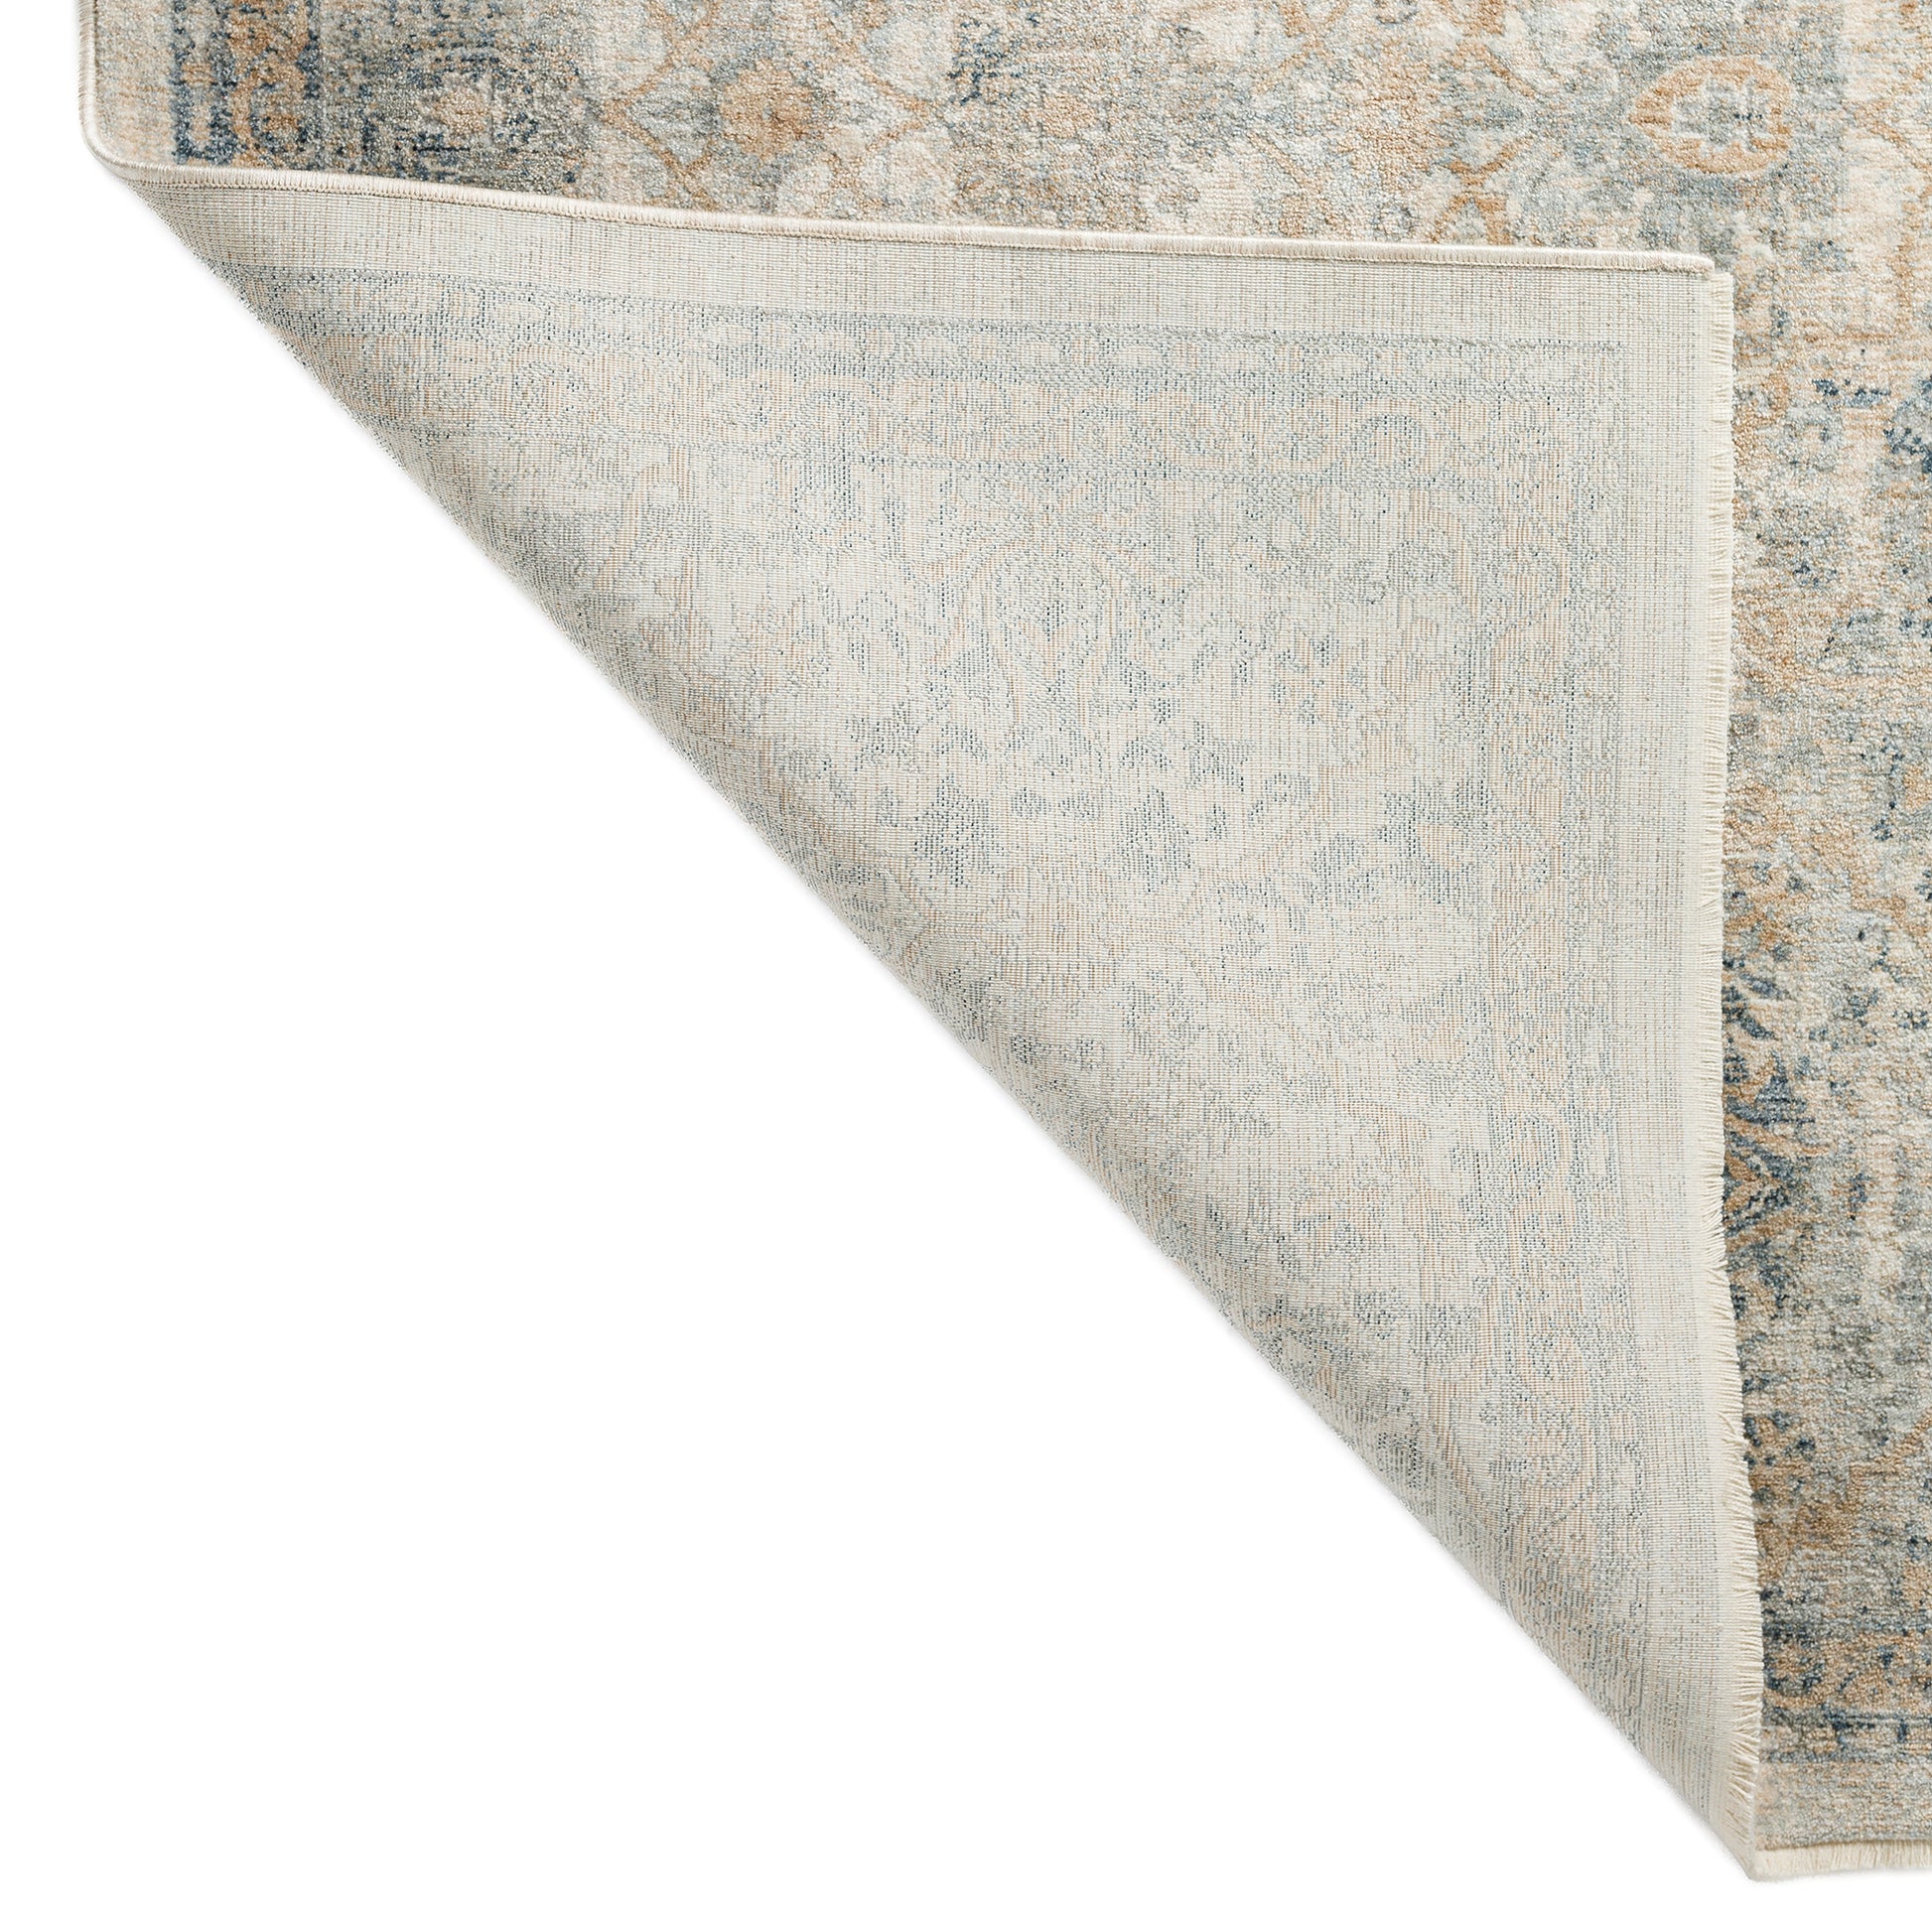 Dalyn Rugs Regal RG5 Linen Traditional Power Woven Rug